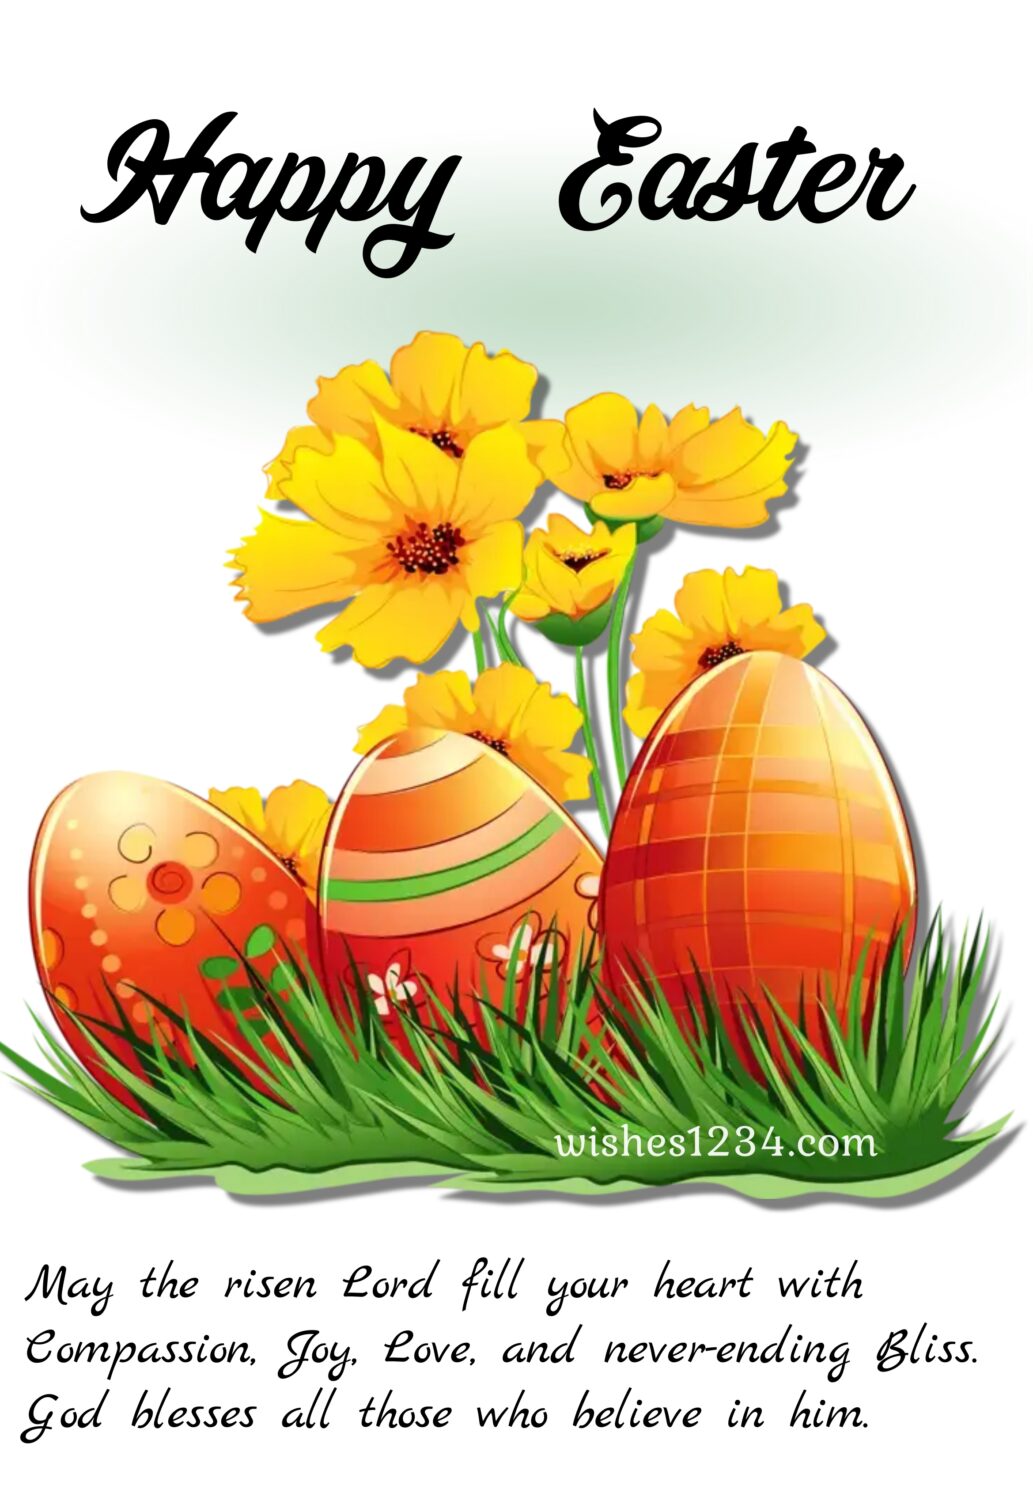 Three easter eggs with yellow flowers, Happy Easter Wishes, Quotes & Images.